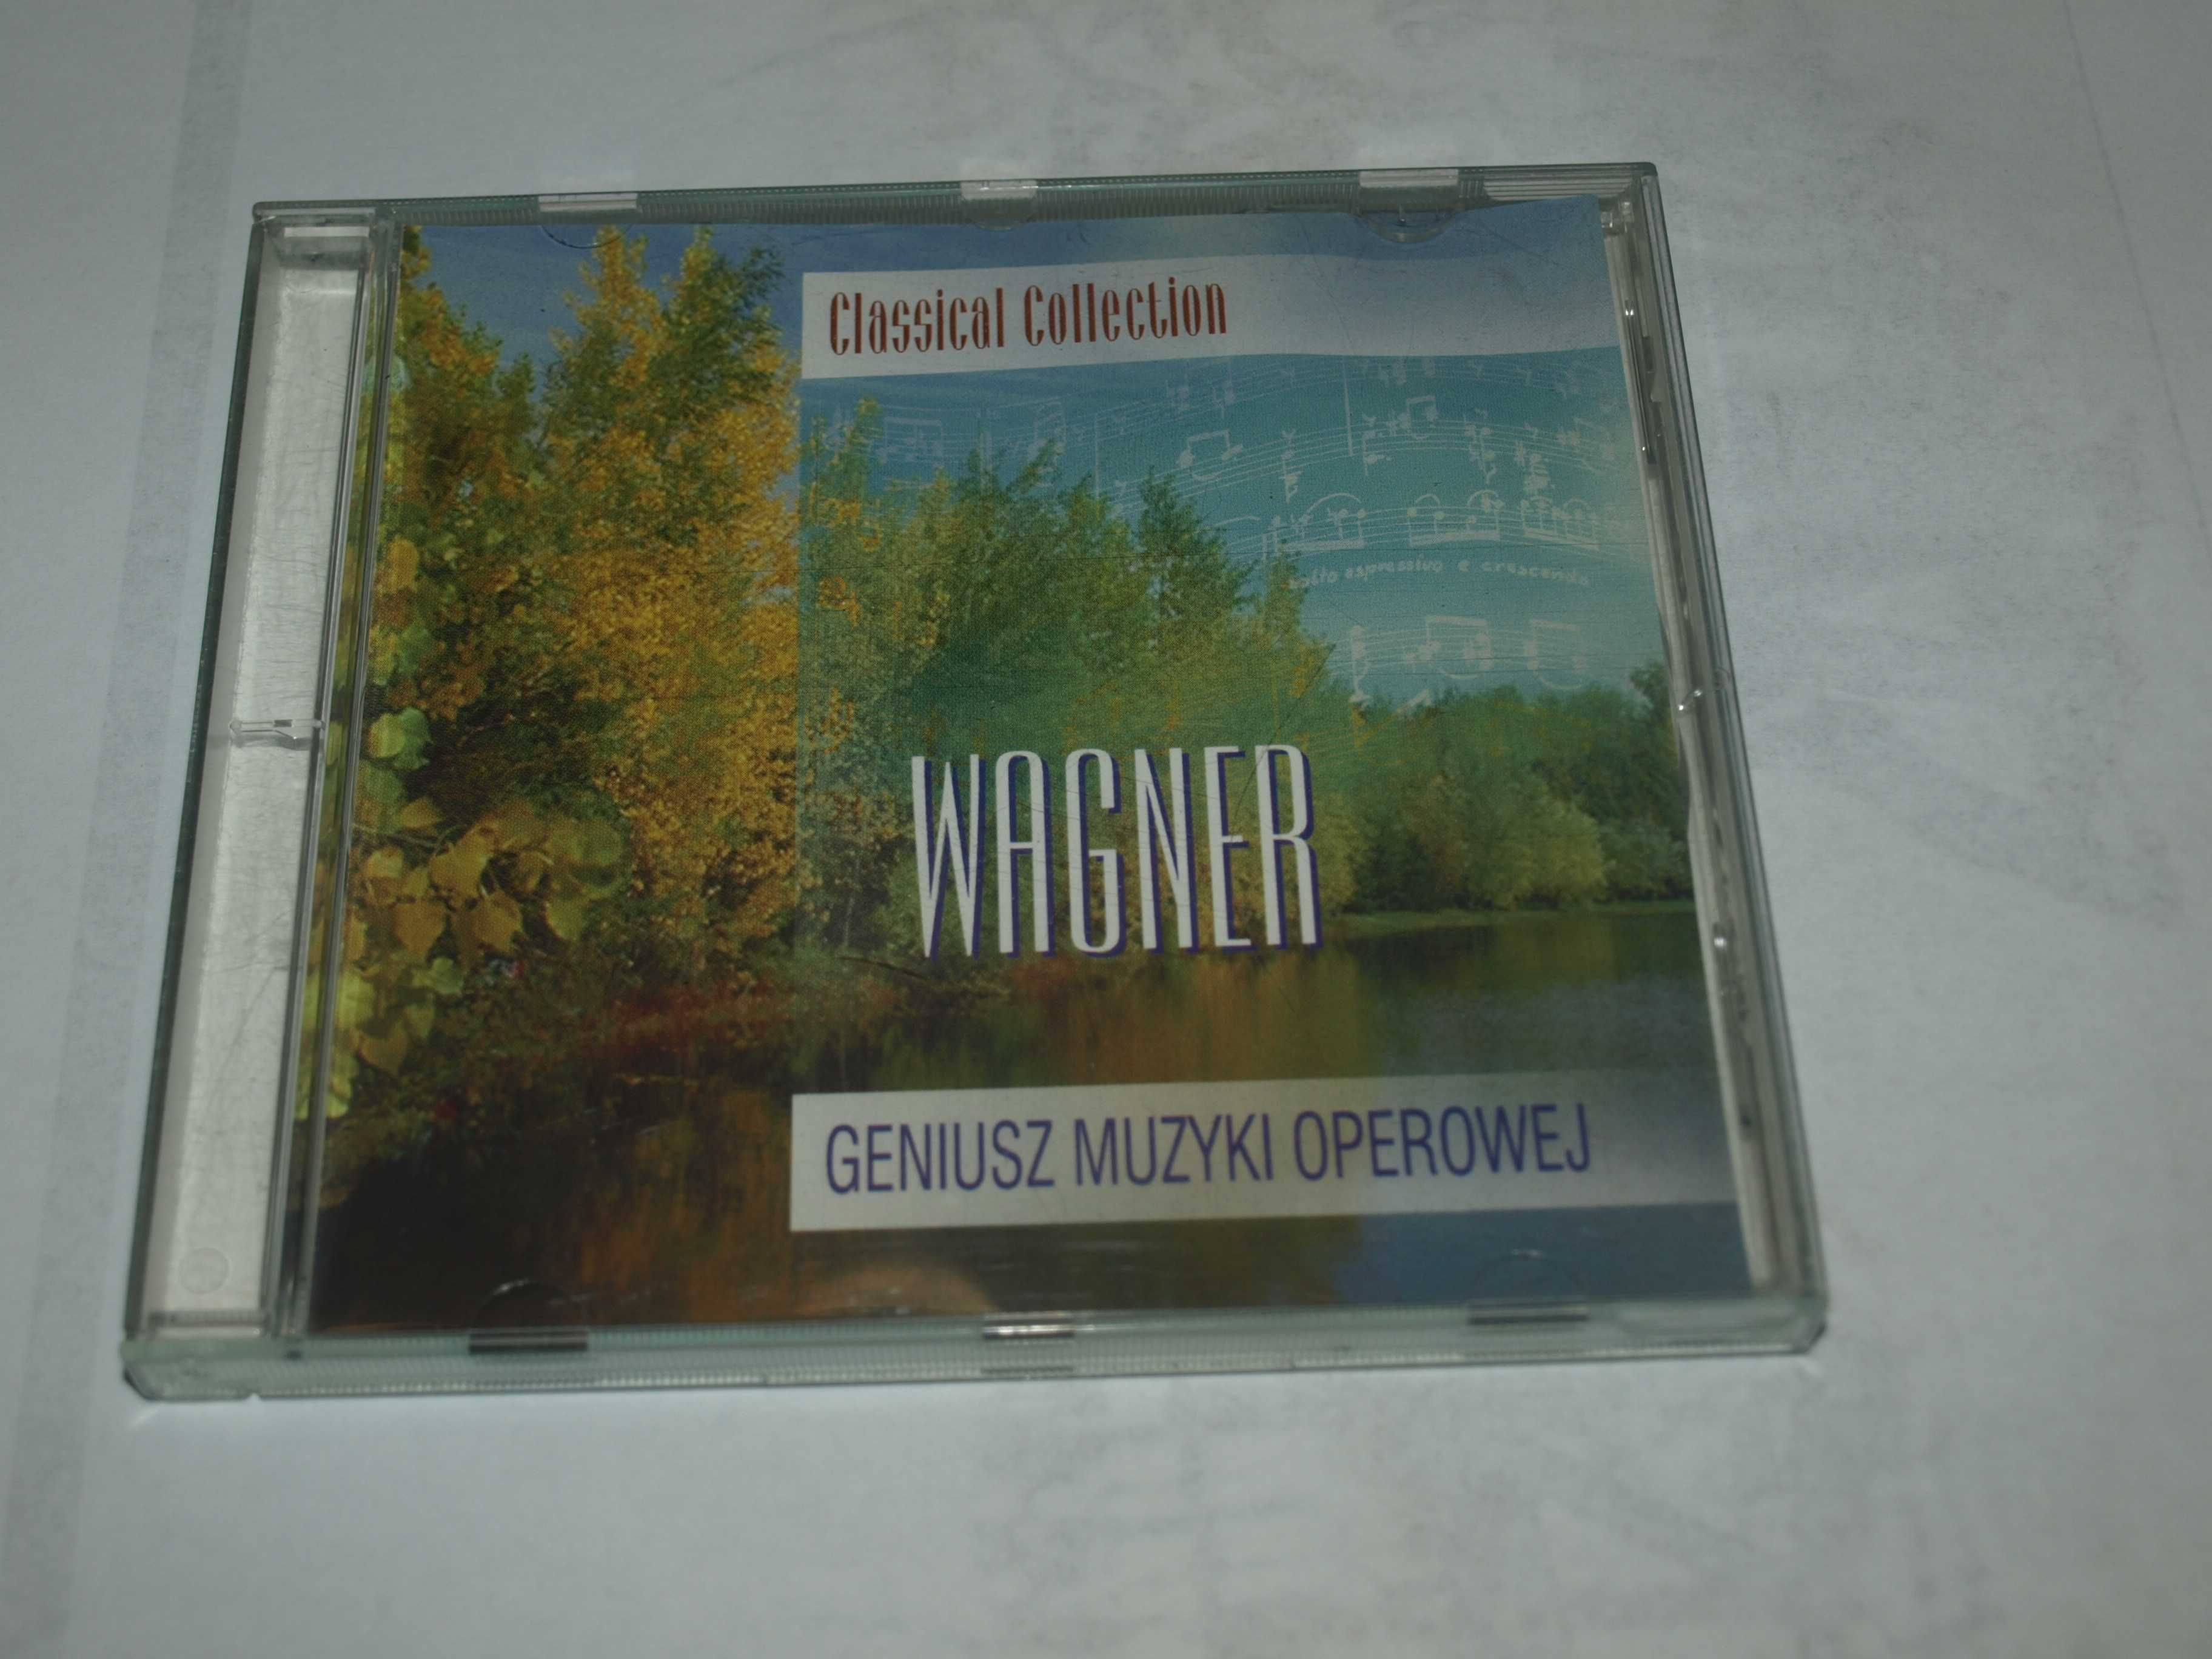 Classical Collection Wagner